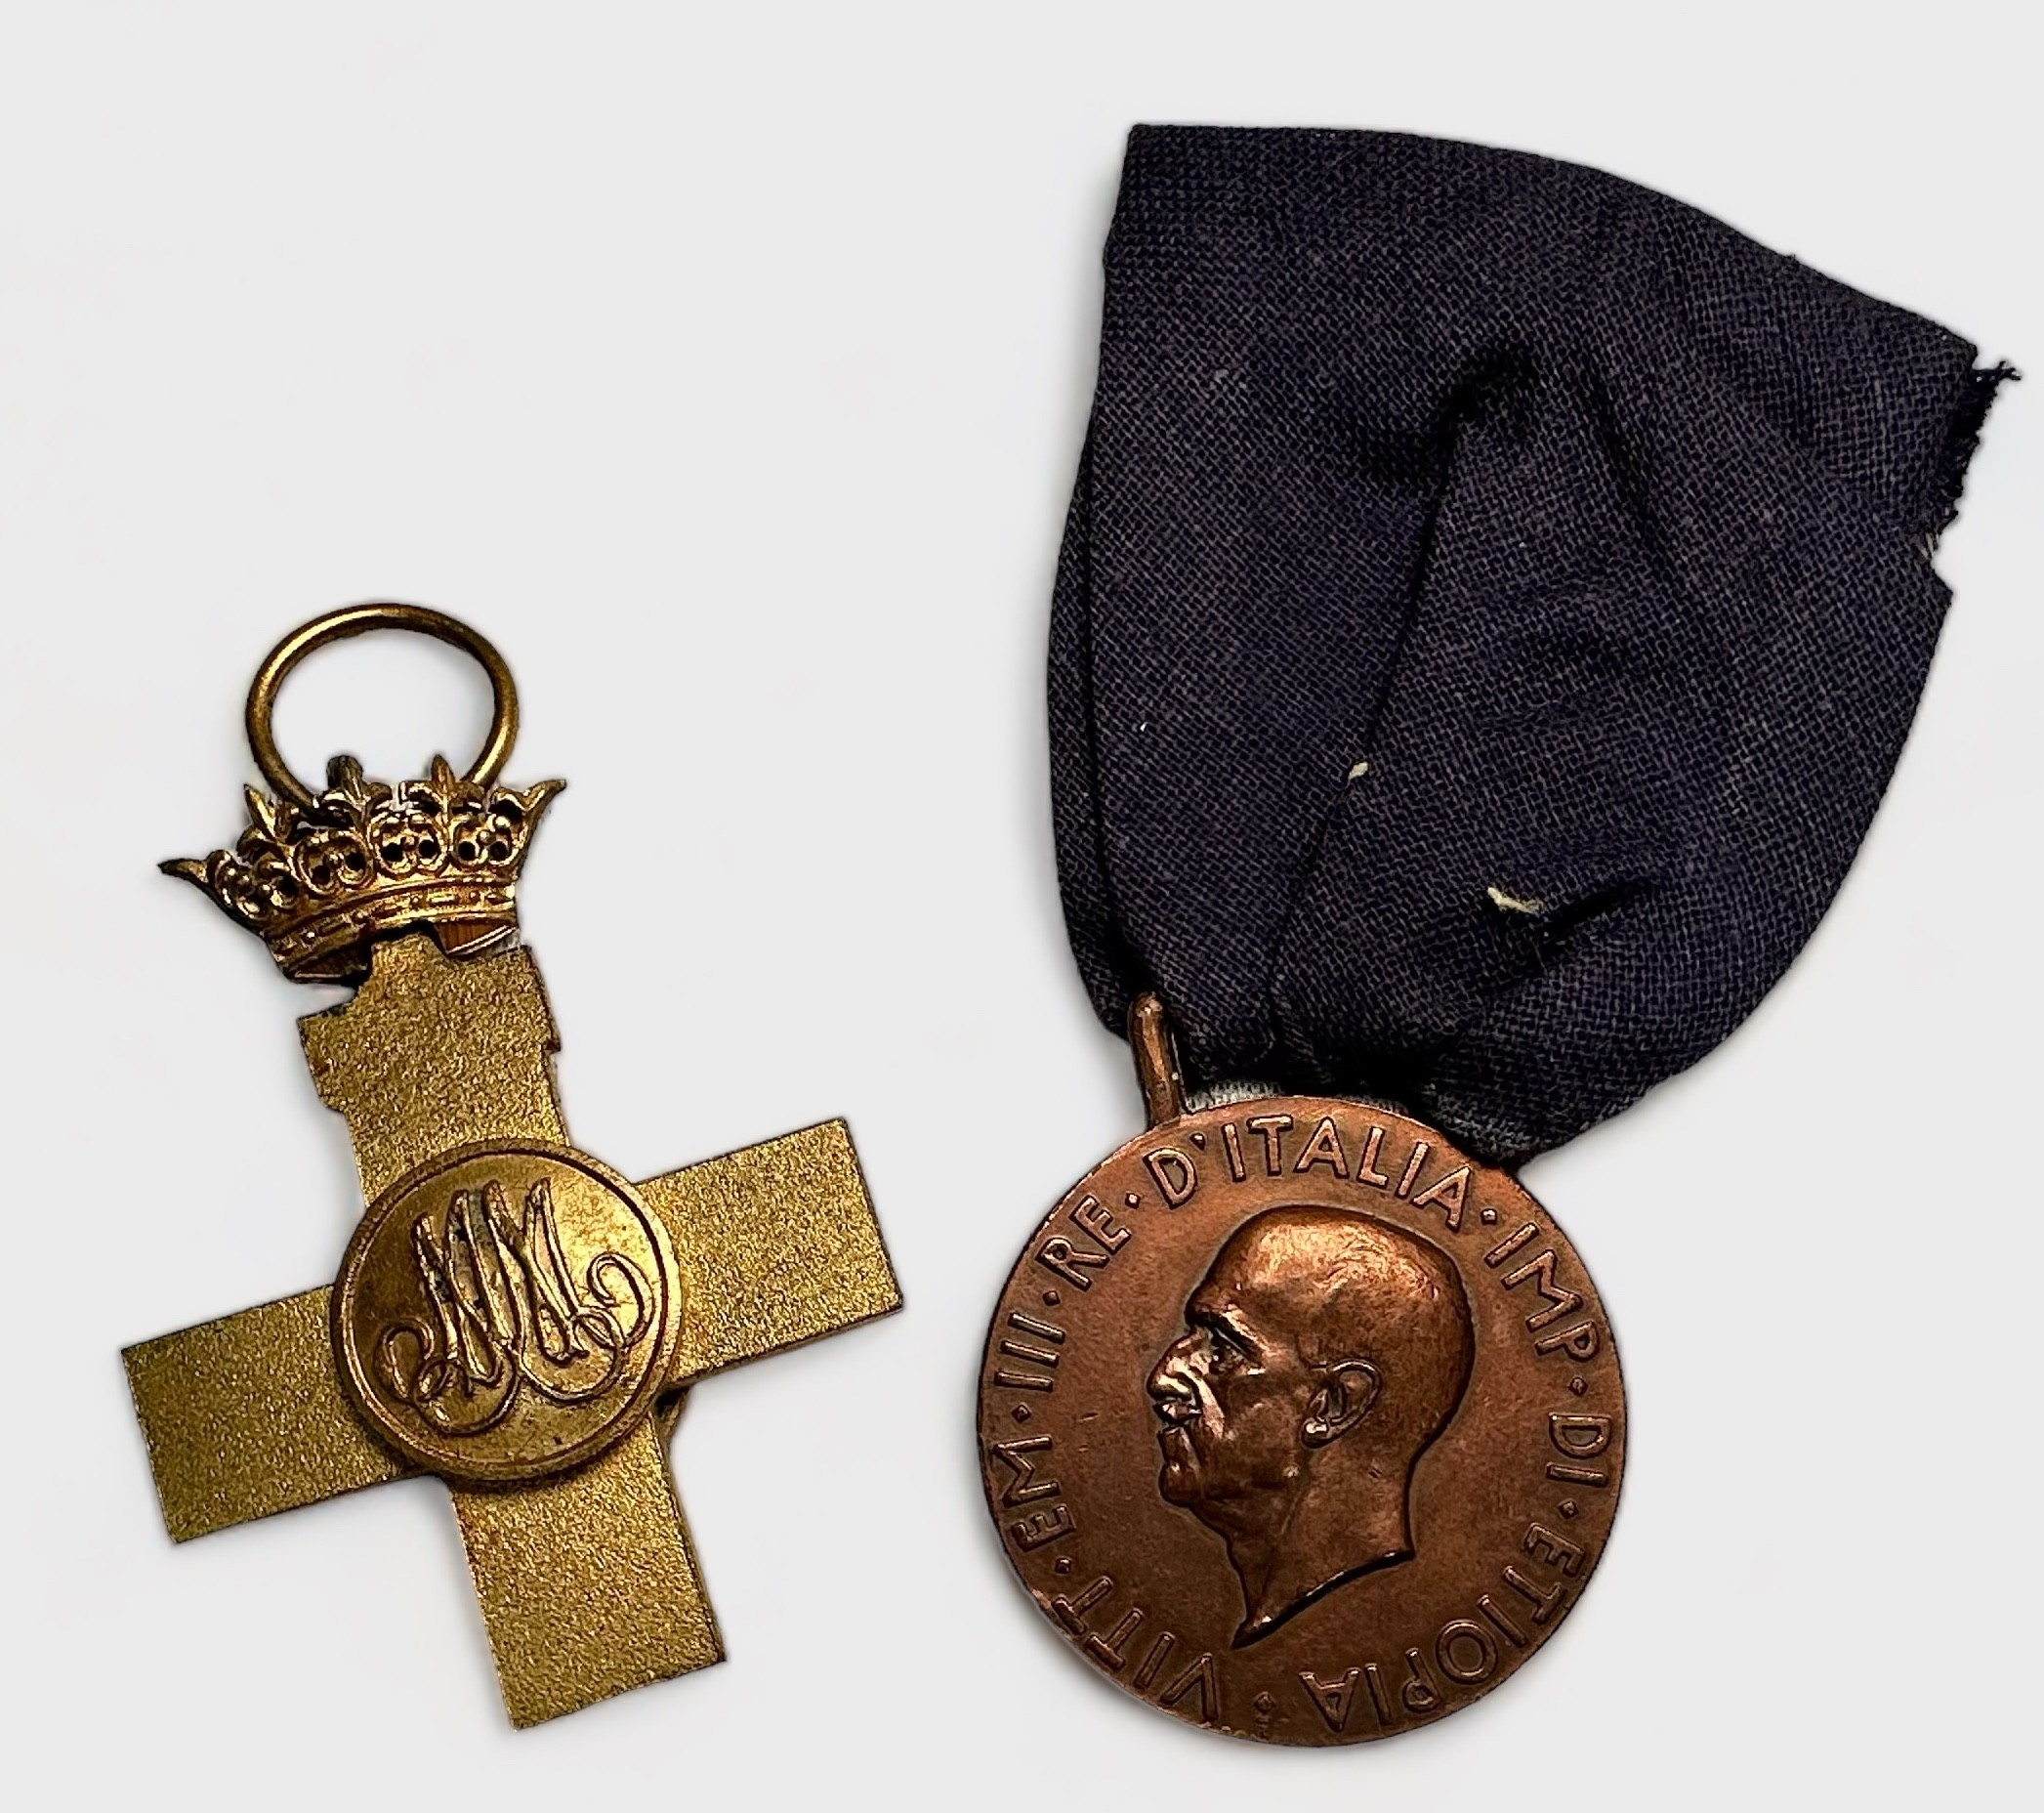 An Italian East Africa Campaign Medal 1936, A Spanish Cross of Military Merit (Civil War), and a - Image 2 of 3